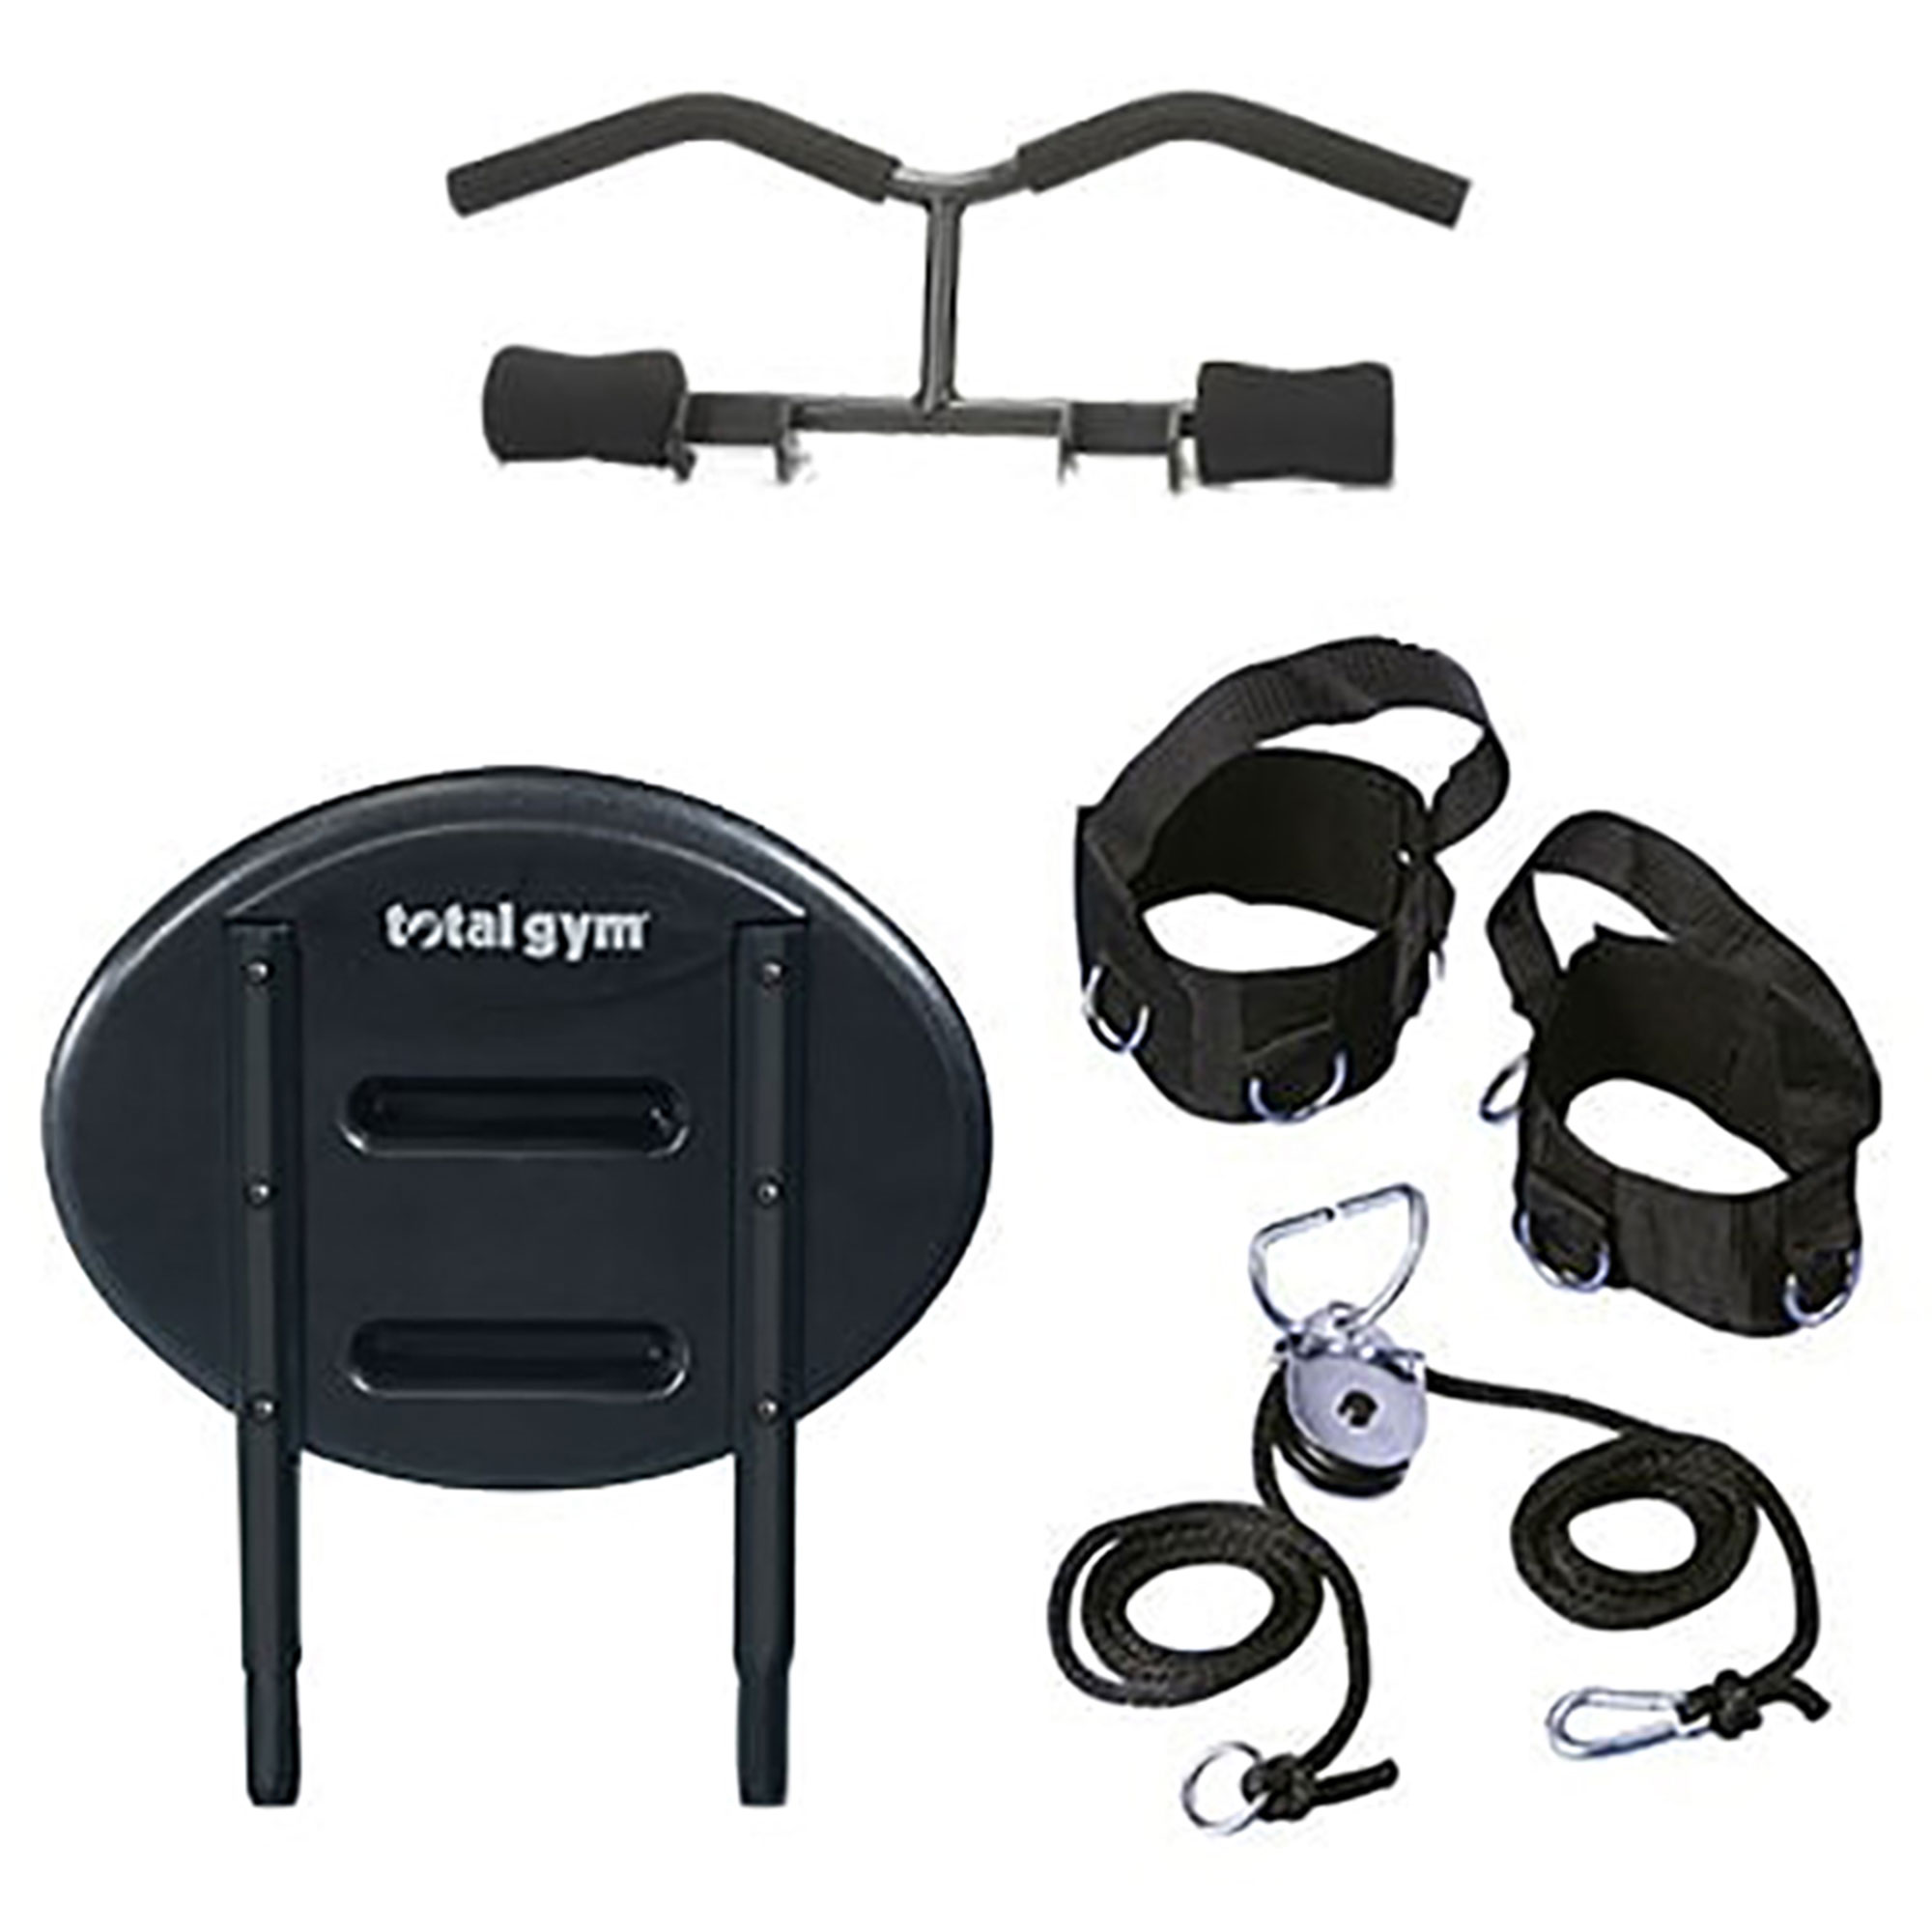 Total Gym XLS Men/Women Universal Fold Home Gym Workout Machine Plus Accessories - image 8 of 11